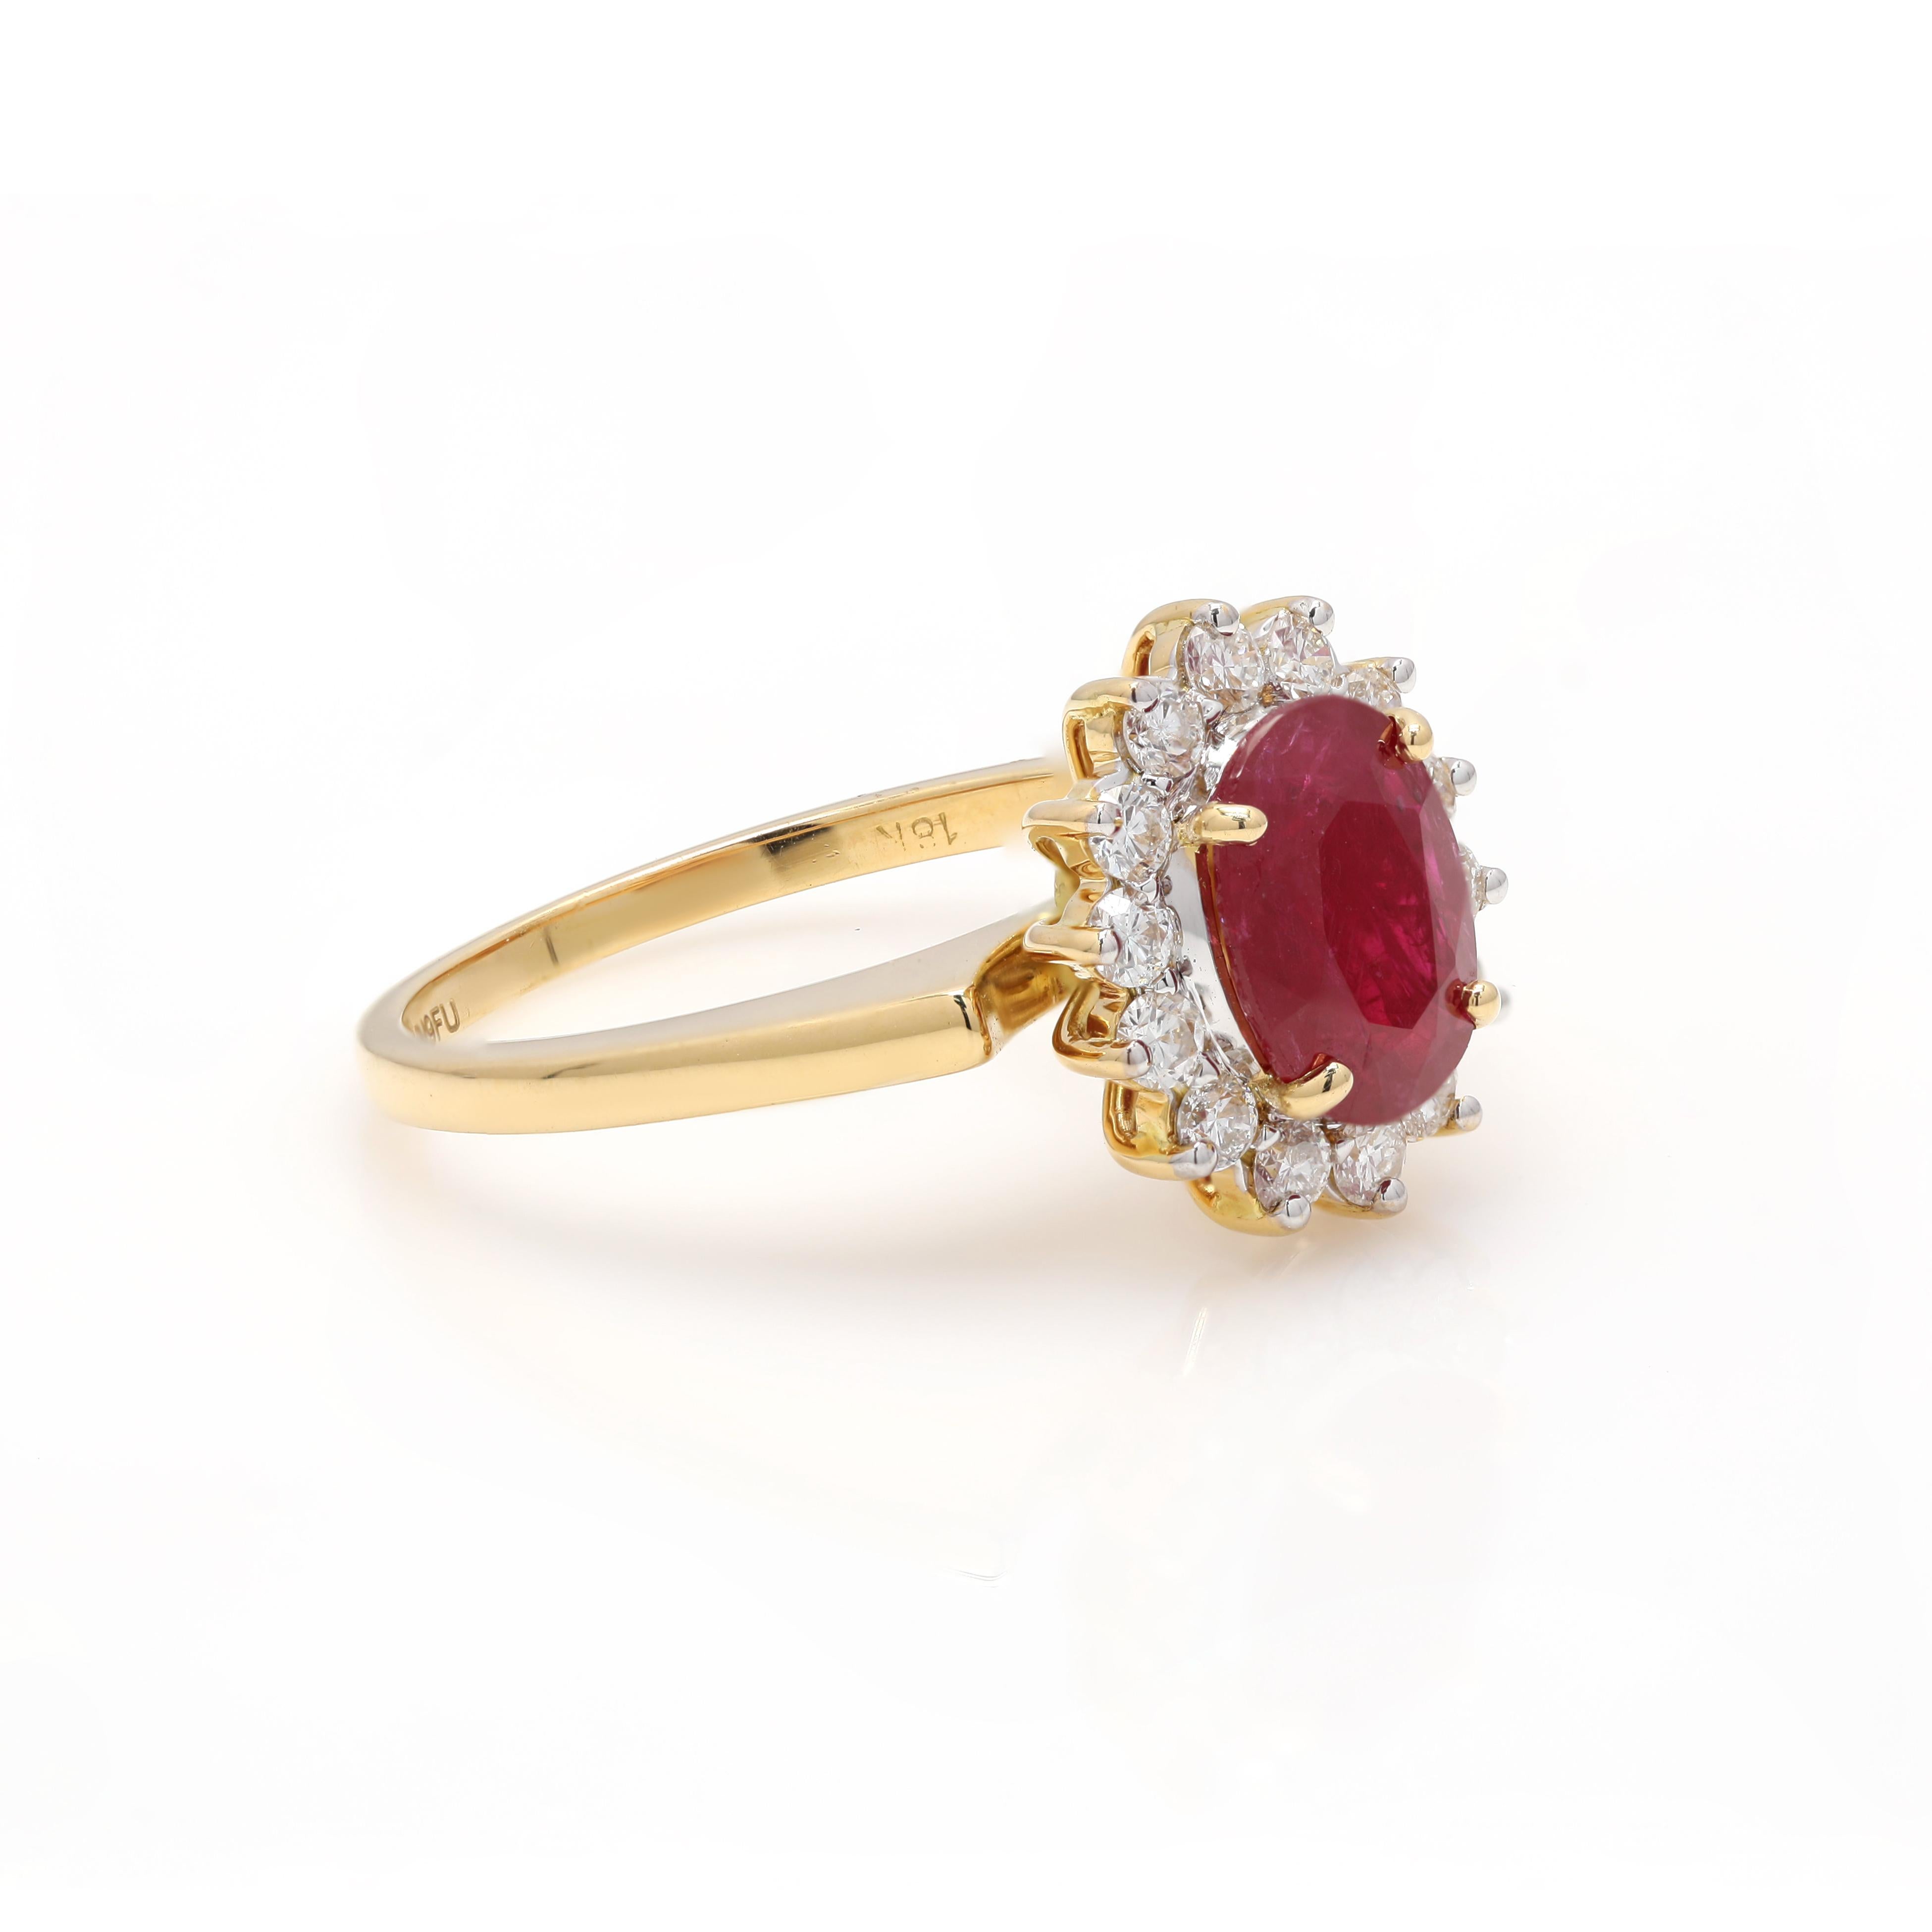 For Sale:  1.83 Carats Deep Red Ruby and Halo Diamond Ring 18k Solid Yellow Gold 2